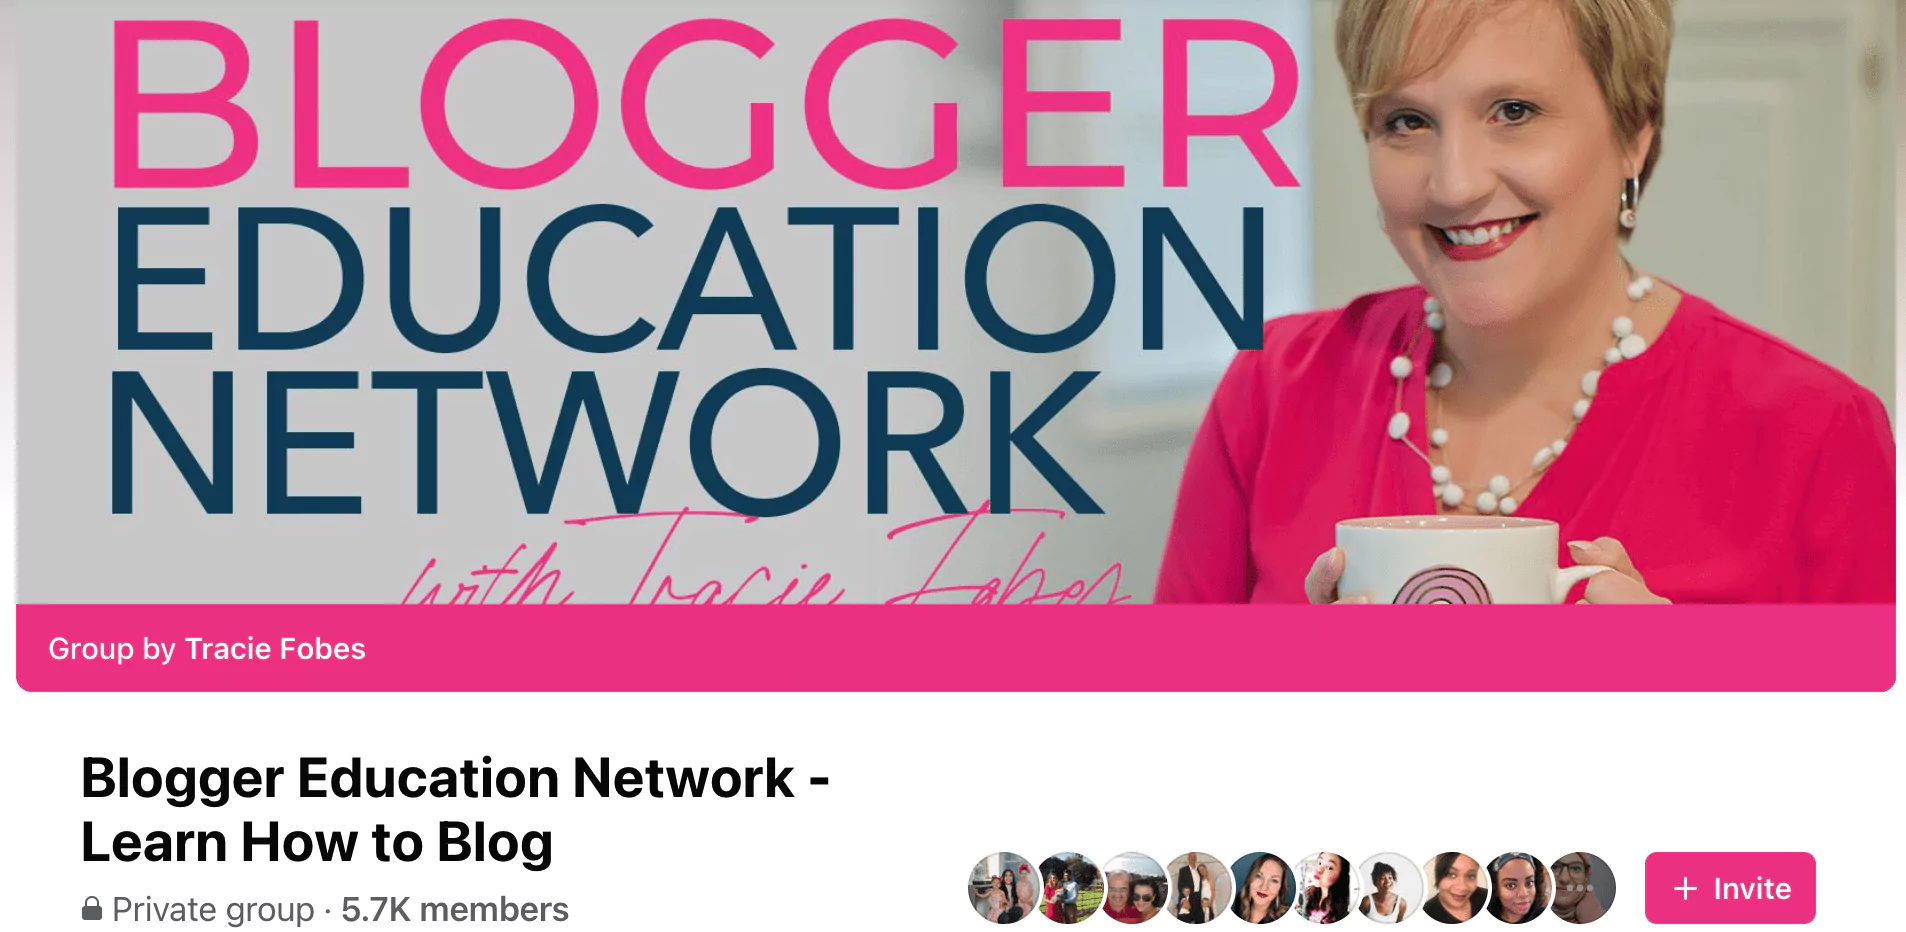 Blogger Education Network - Learn How to Blog